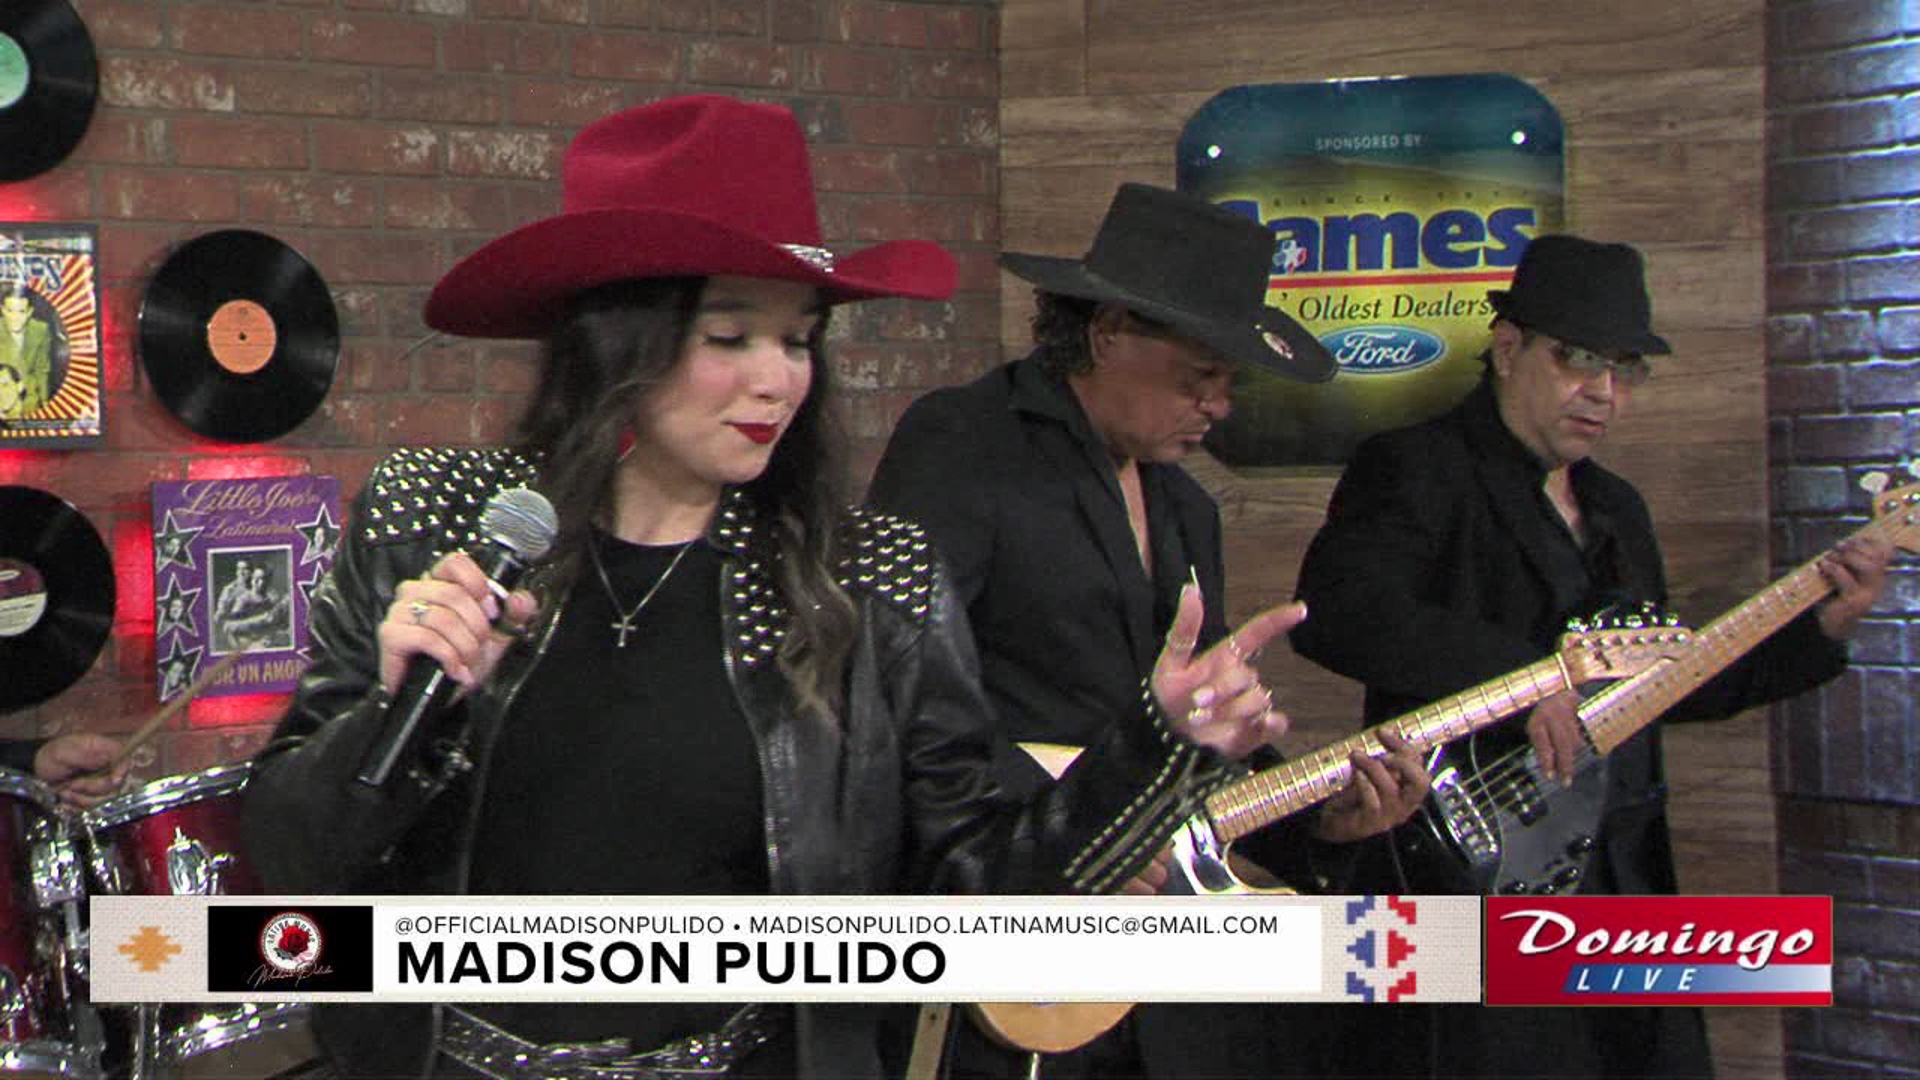 Madison Pulido joined us on Domingo Live to perform her song "Cosquillearte."